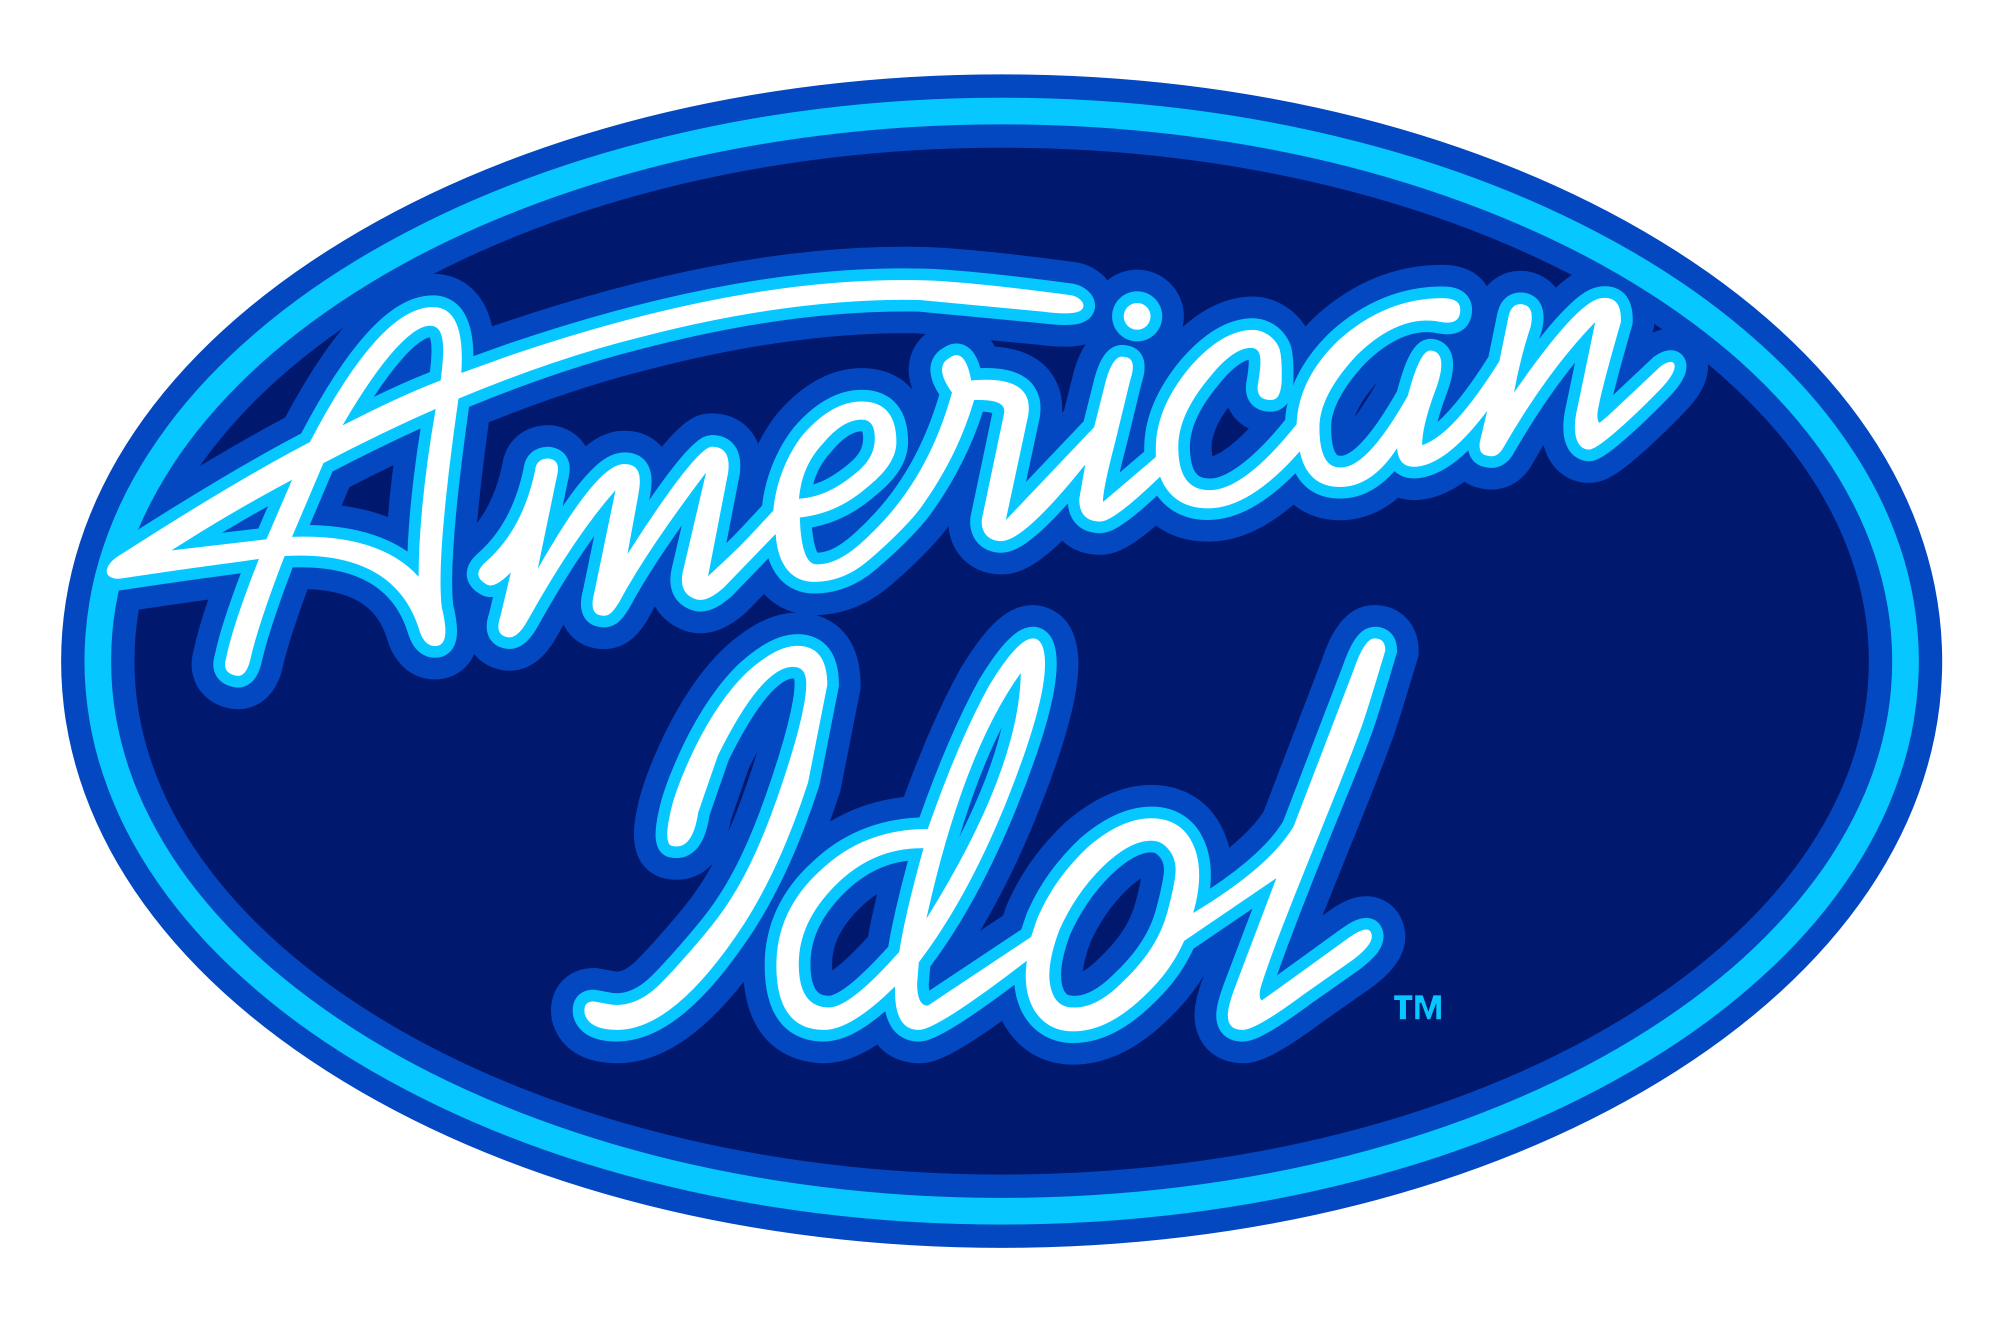 It’s been confirmed Katy Perry Will Be A Judge On The New “American Idol”